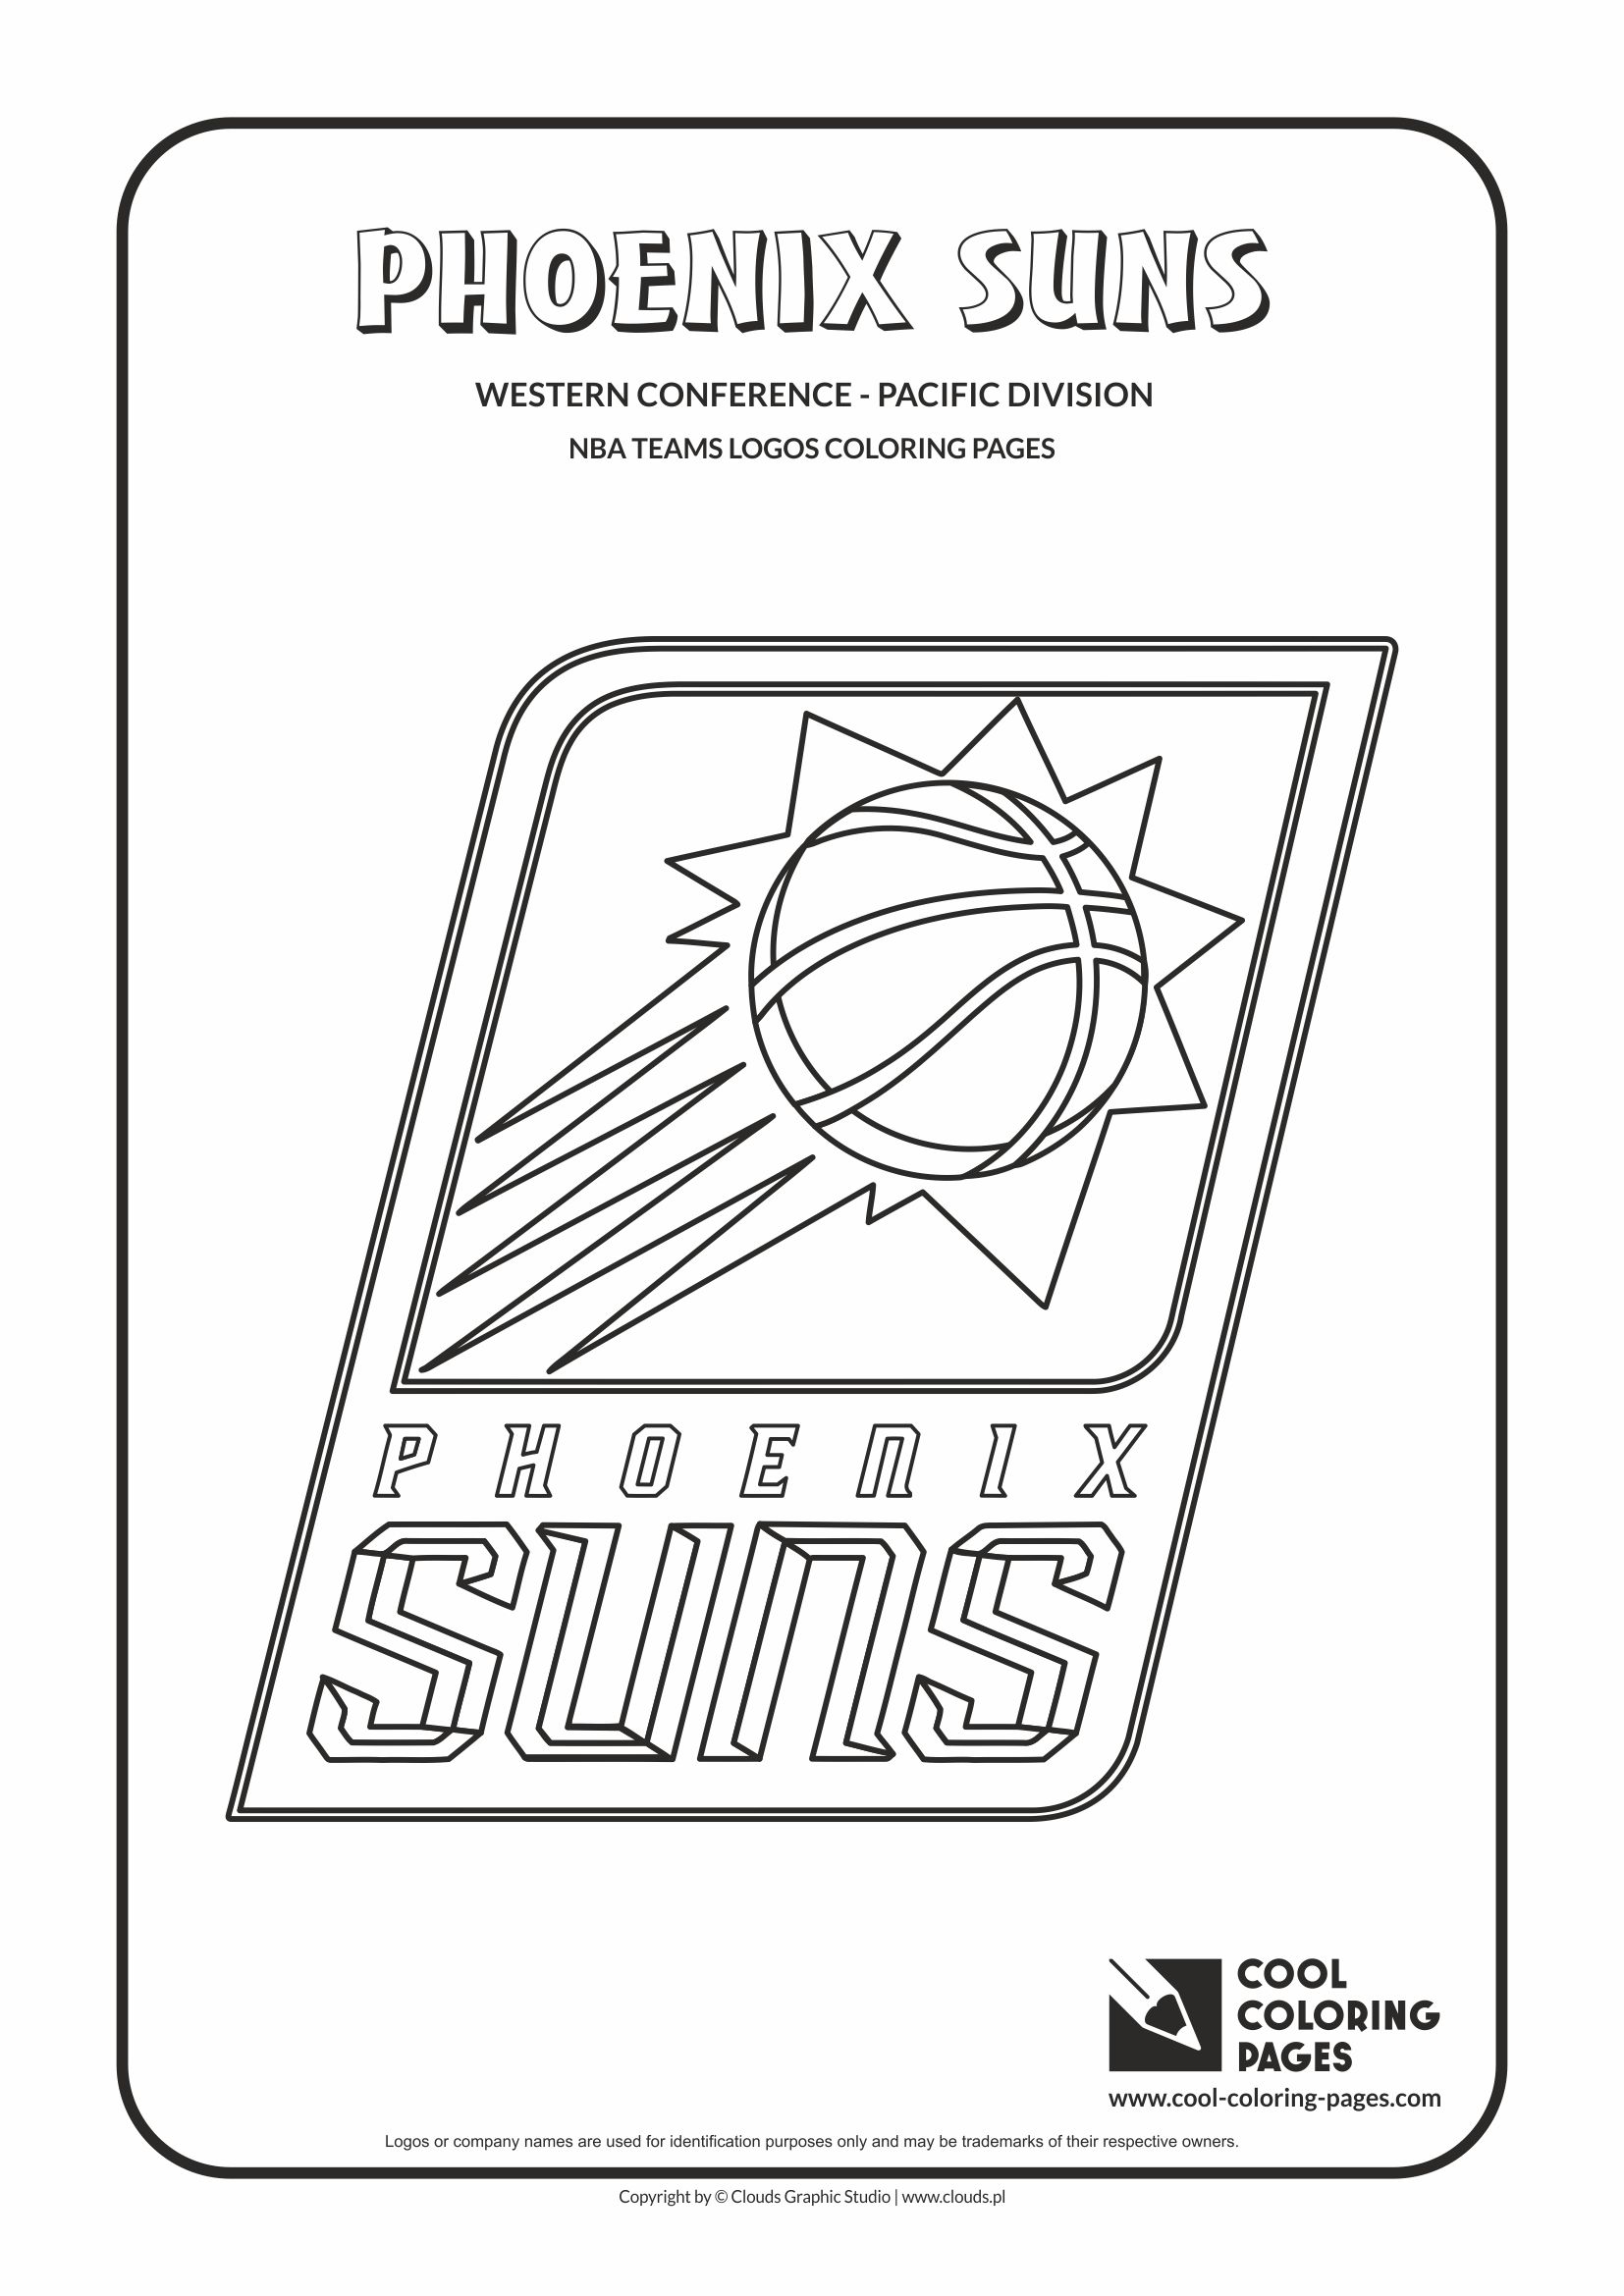 Cool Coloring Pages - NBA Basketball Clubs Logos - Western Conference - Pacific Division / Phoenix Suns logo / Coloring page with Phoenix Suns logo